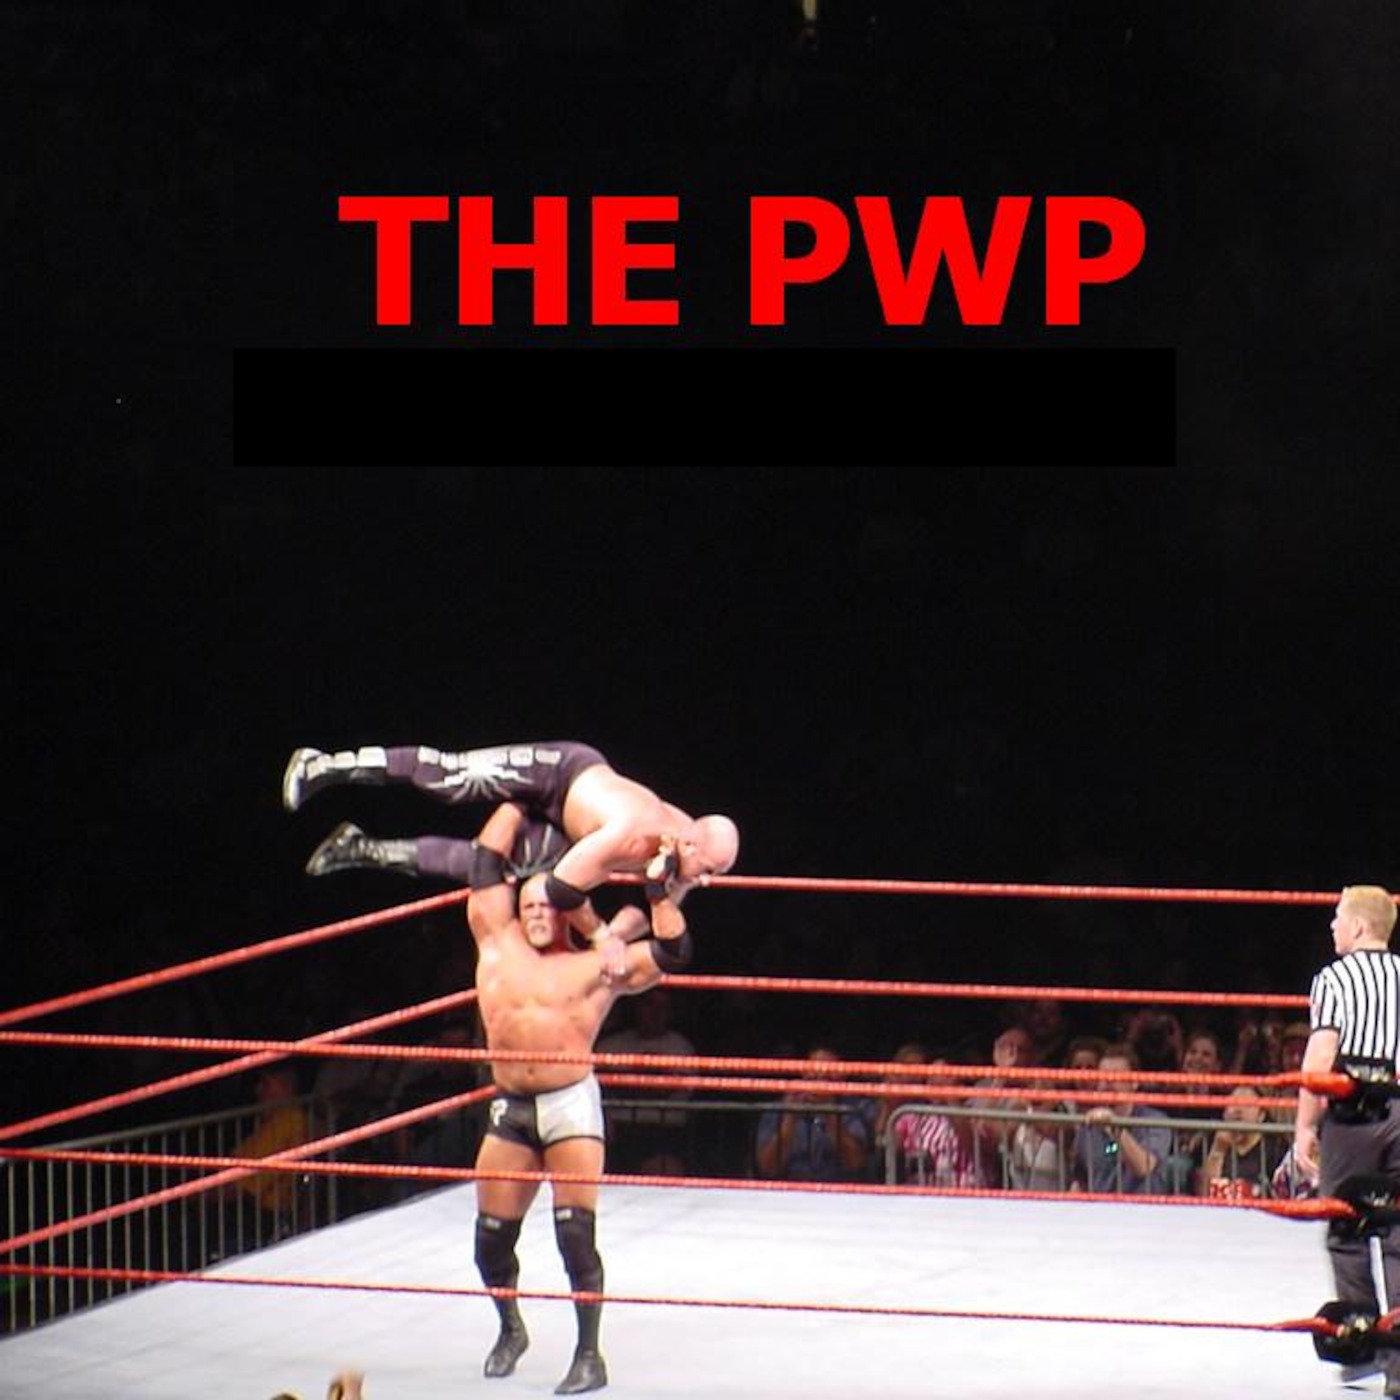 THE PWP:The PWP